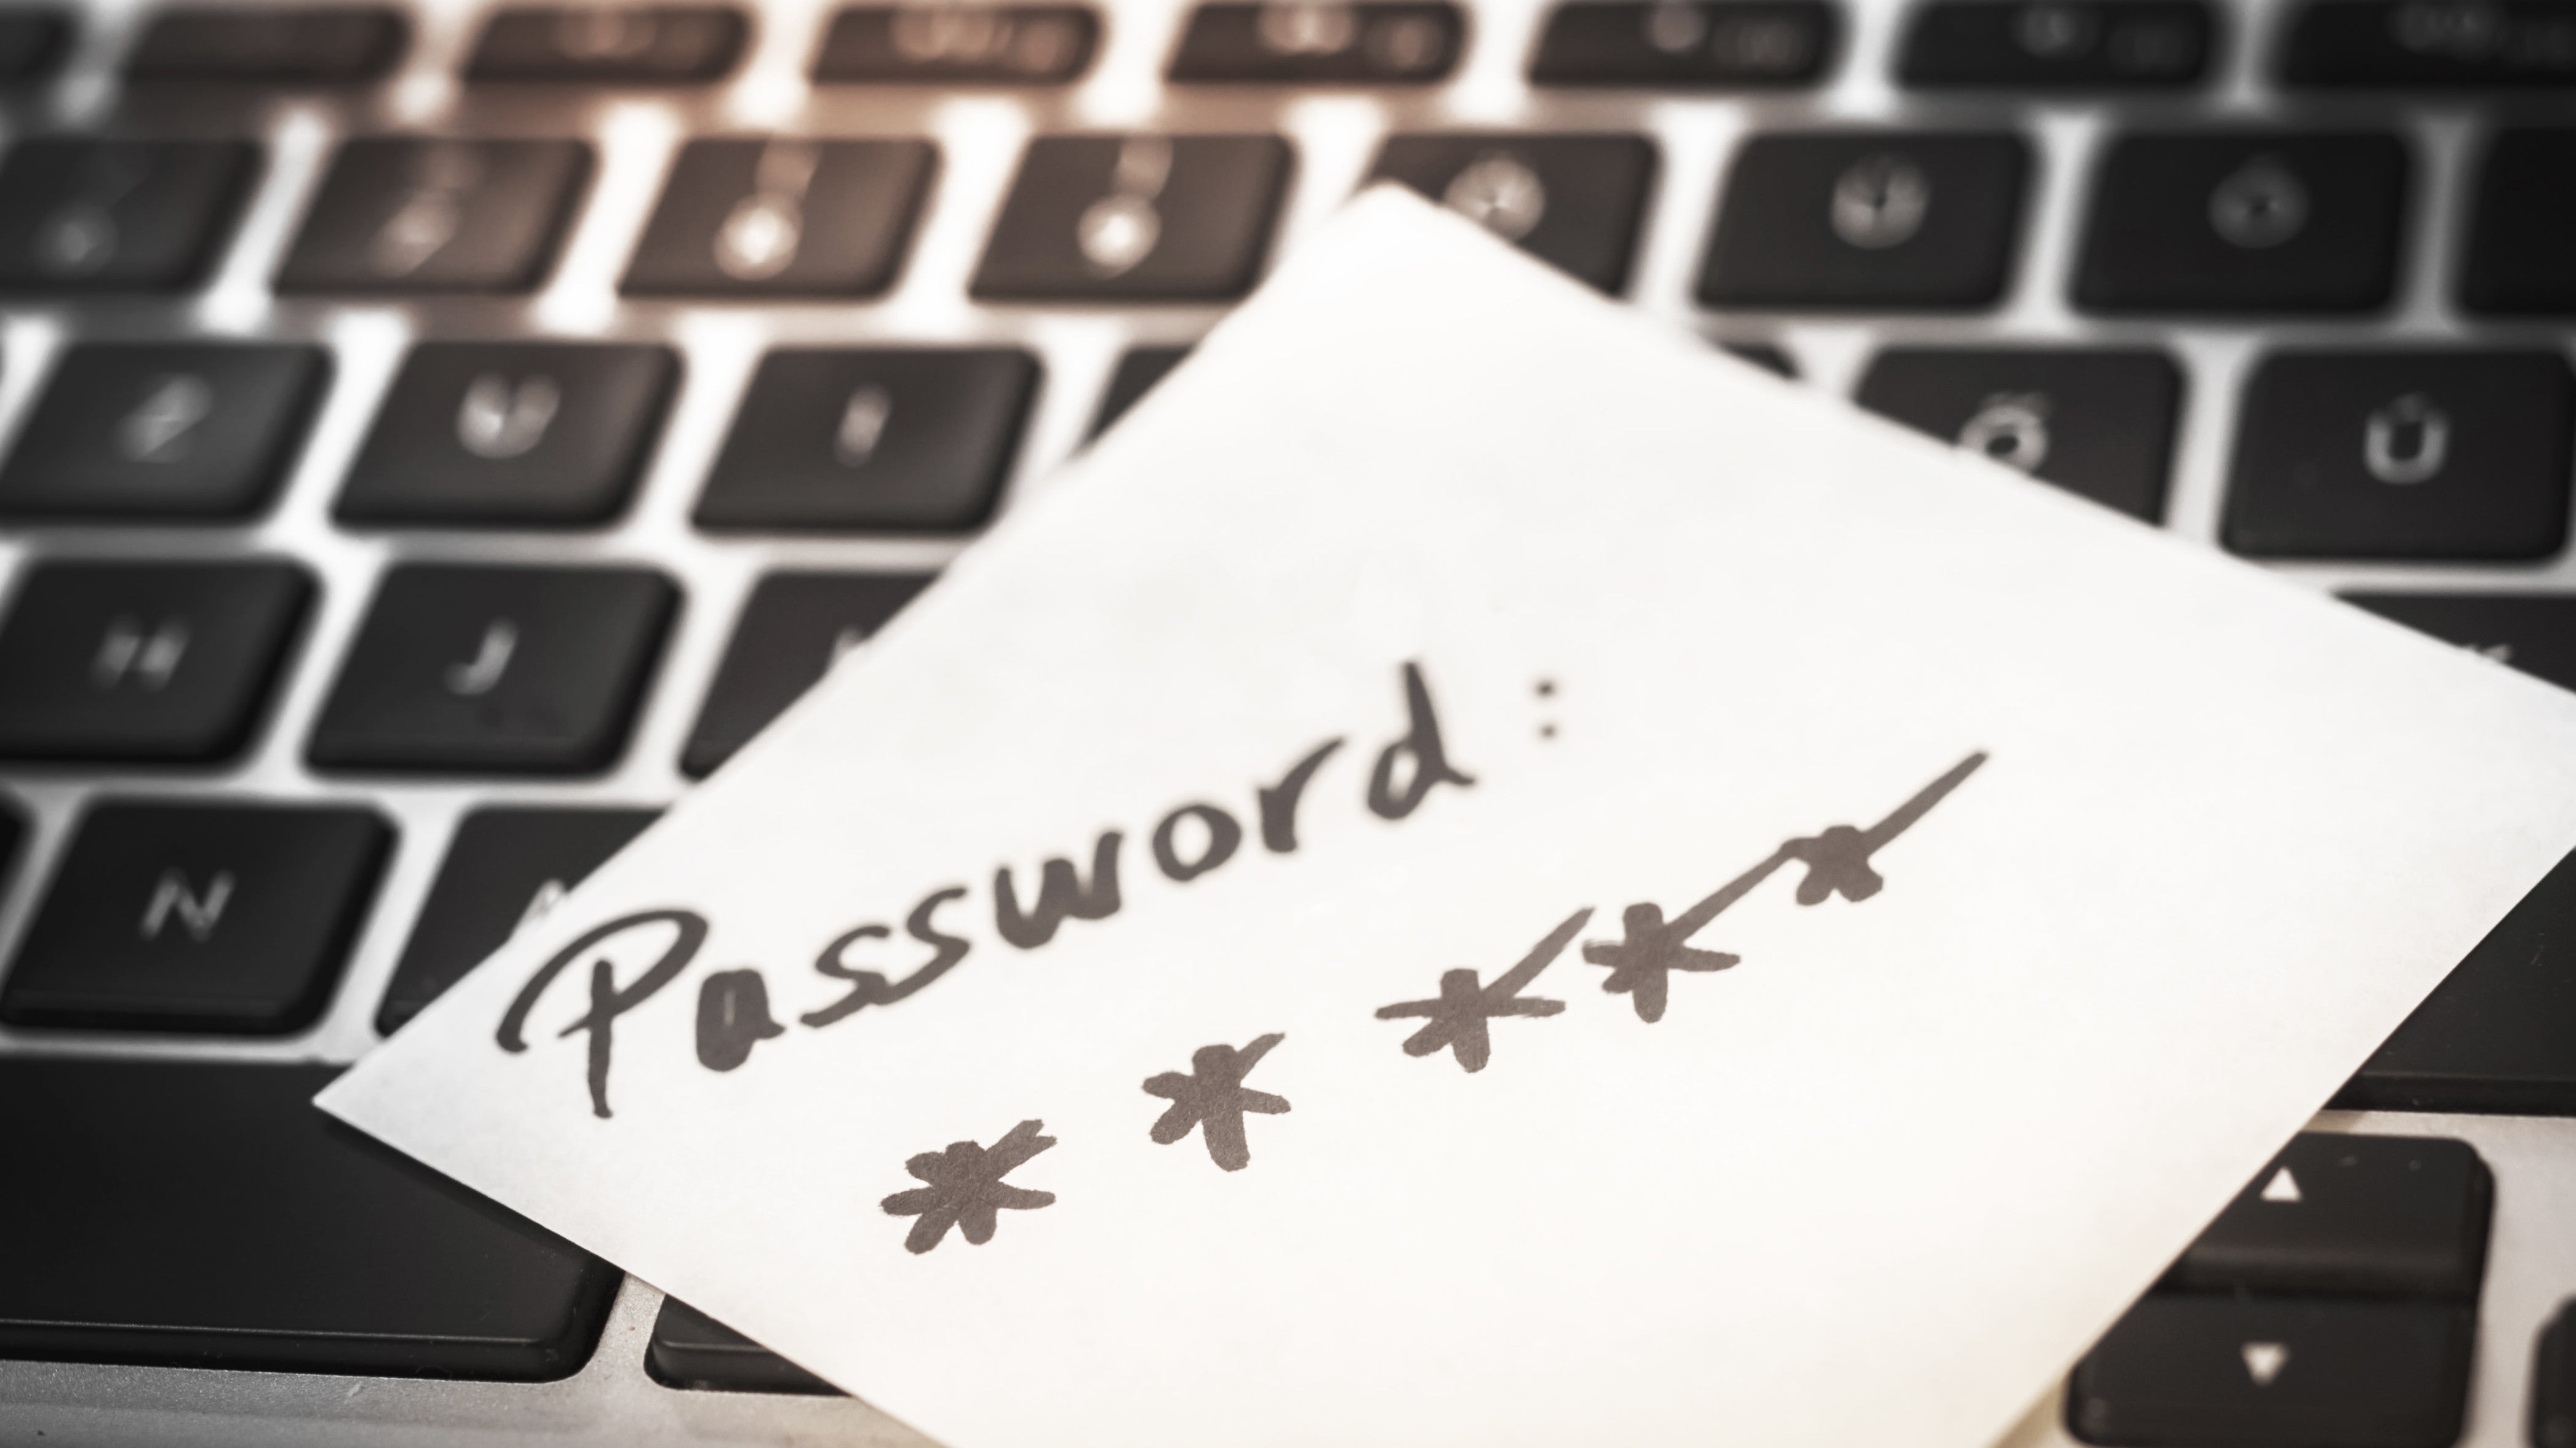 How Do I Access My Work Passwords From My Home Devices?